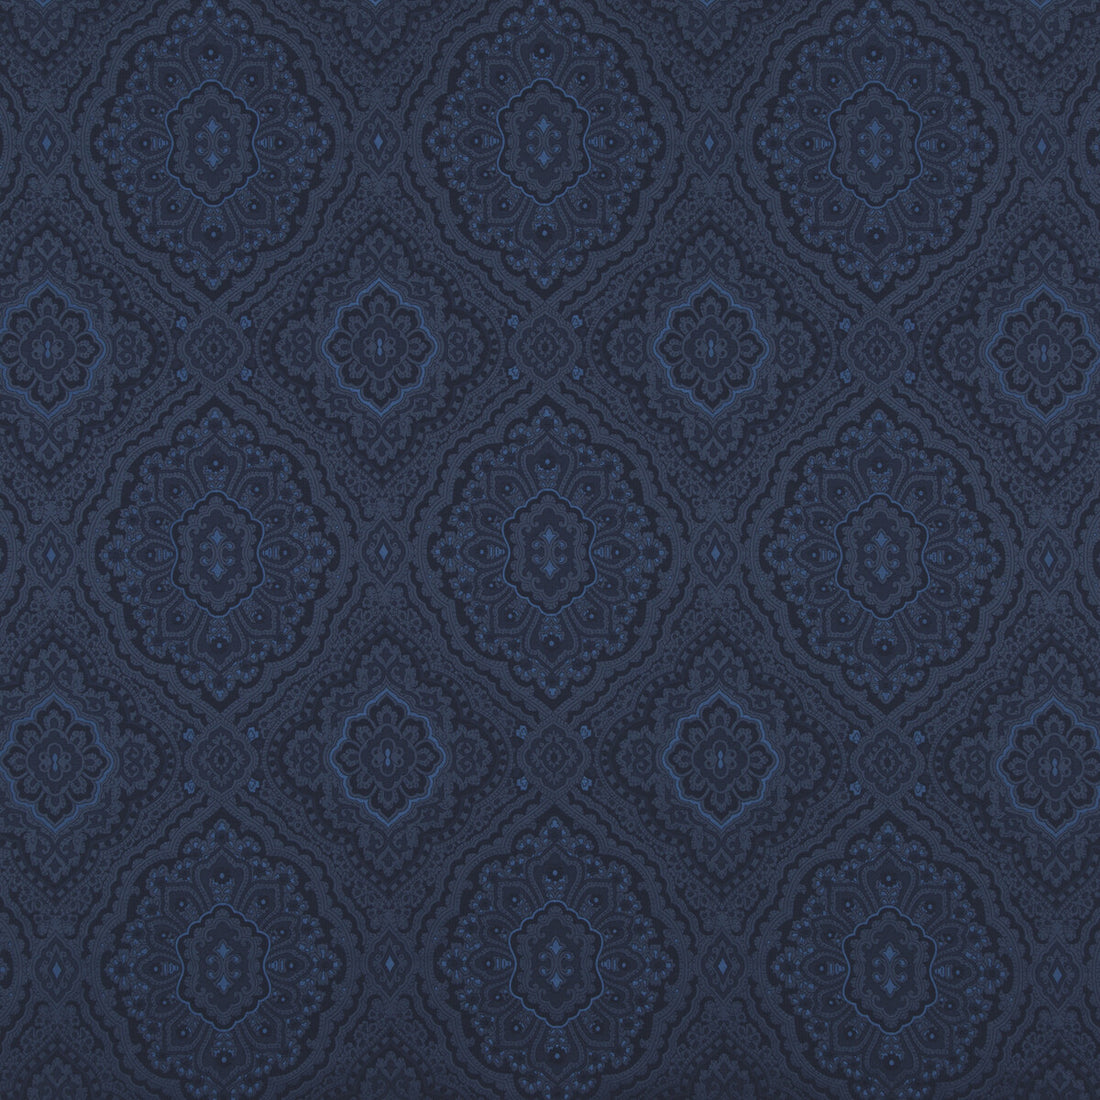 Edessa fabric in indigo color - pattern BF10710.4.0 - by G P &amp; J Baker in the East To West collection